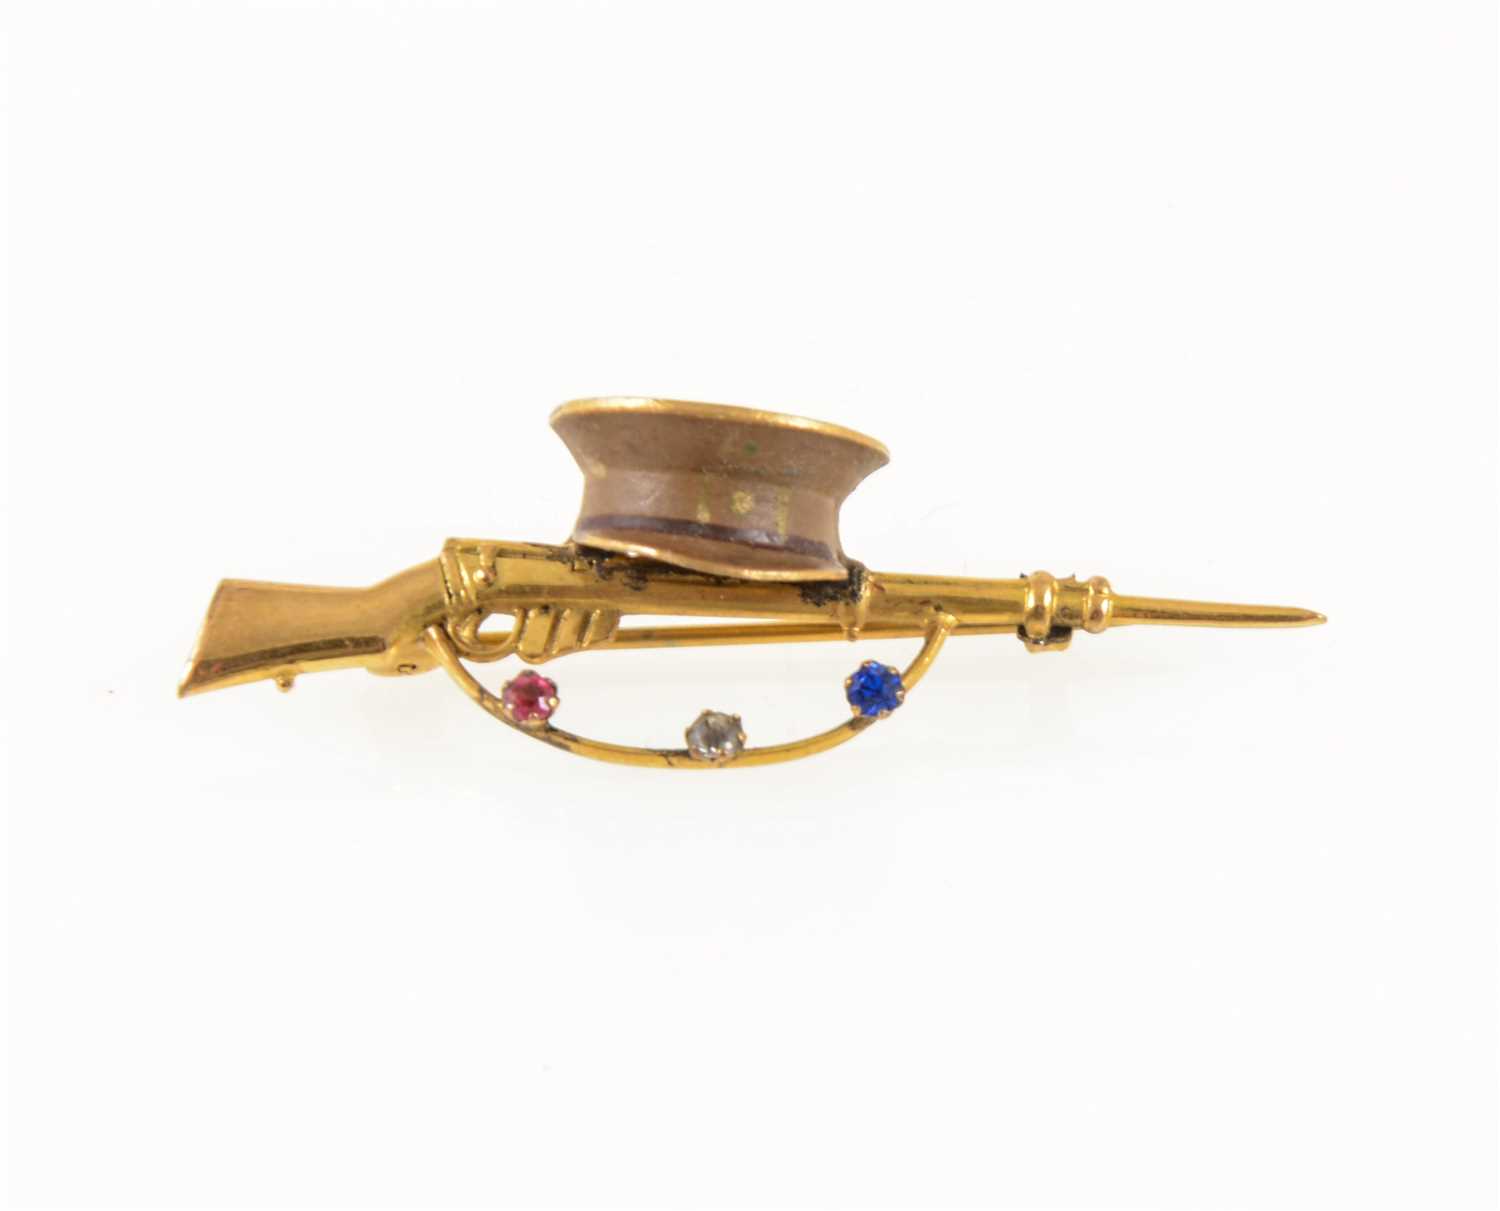 Lot 269 - A gold-plated bar brooch of military interest, a 50mm long rifle with cap and set with three paste stones, red, white and blue, Rd 641091.